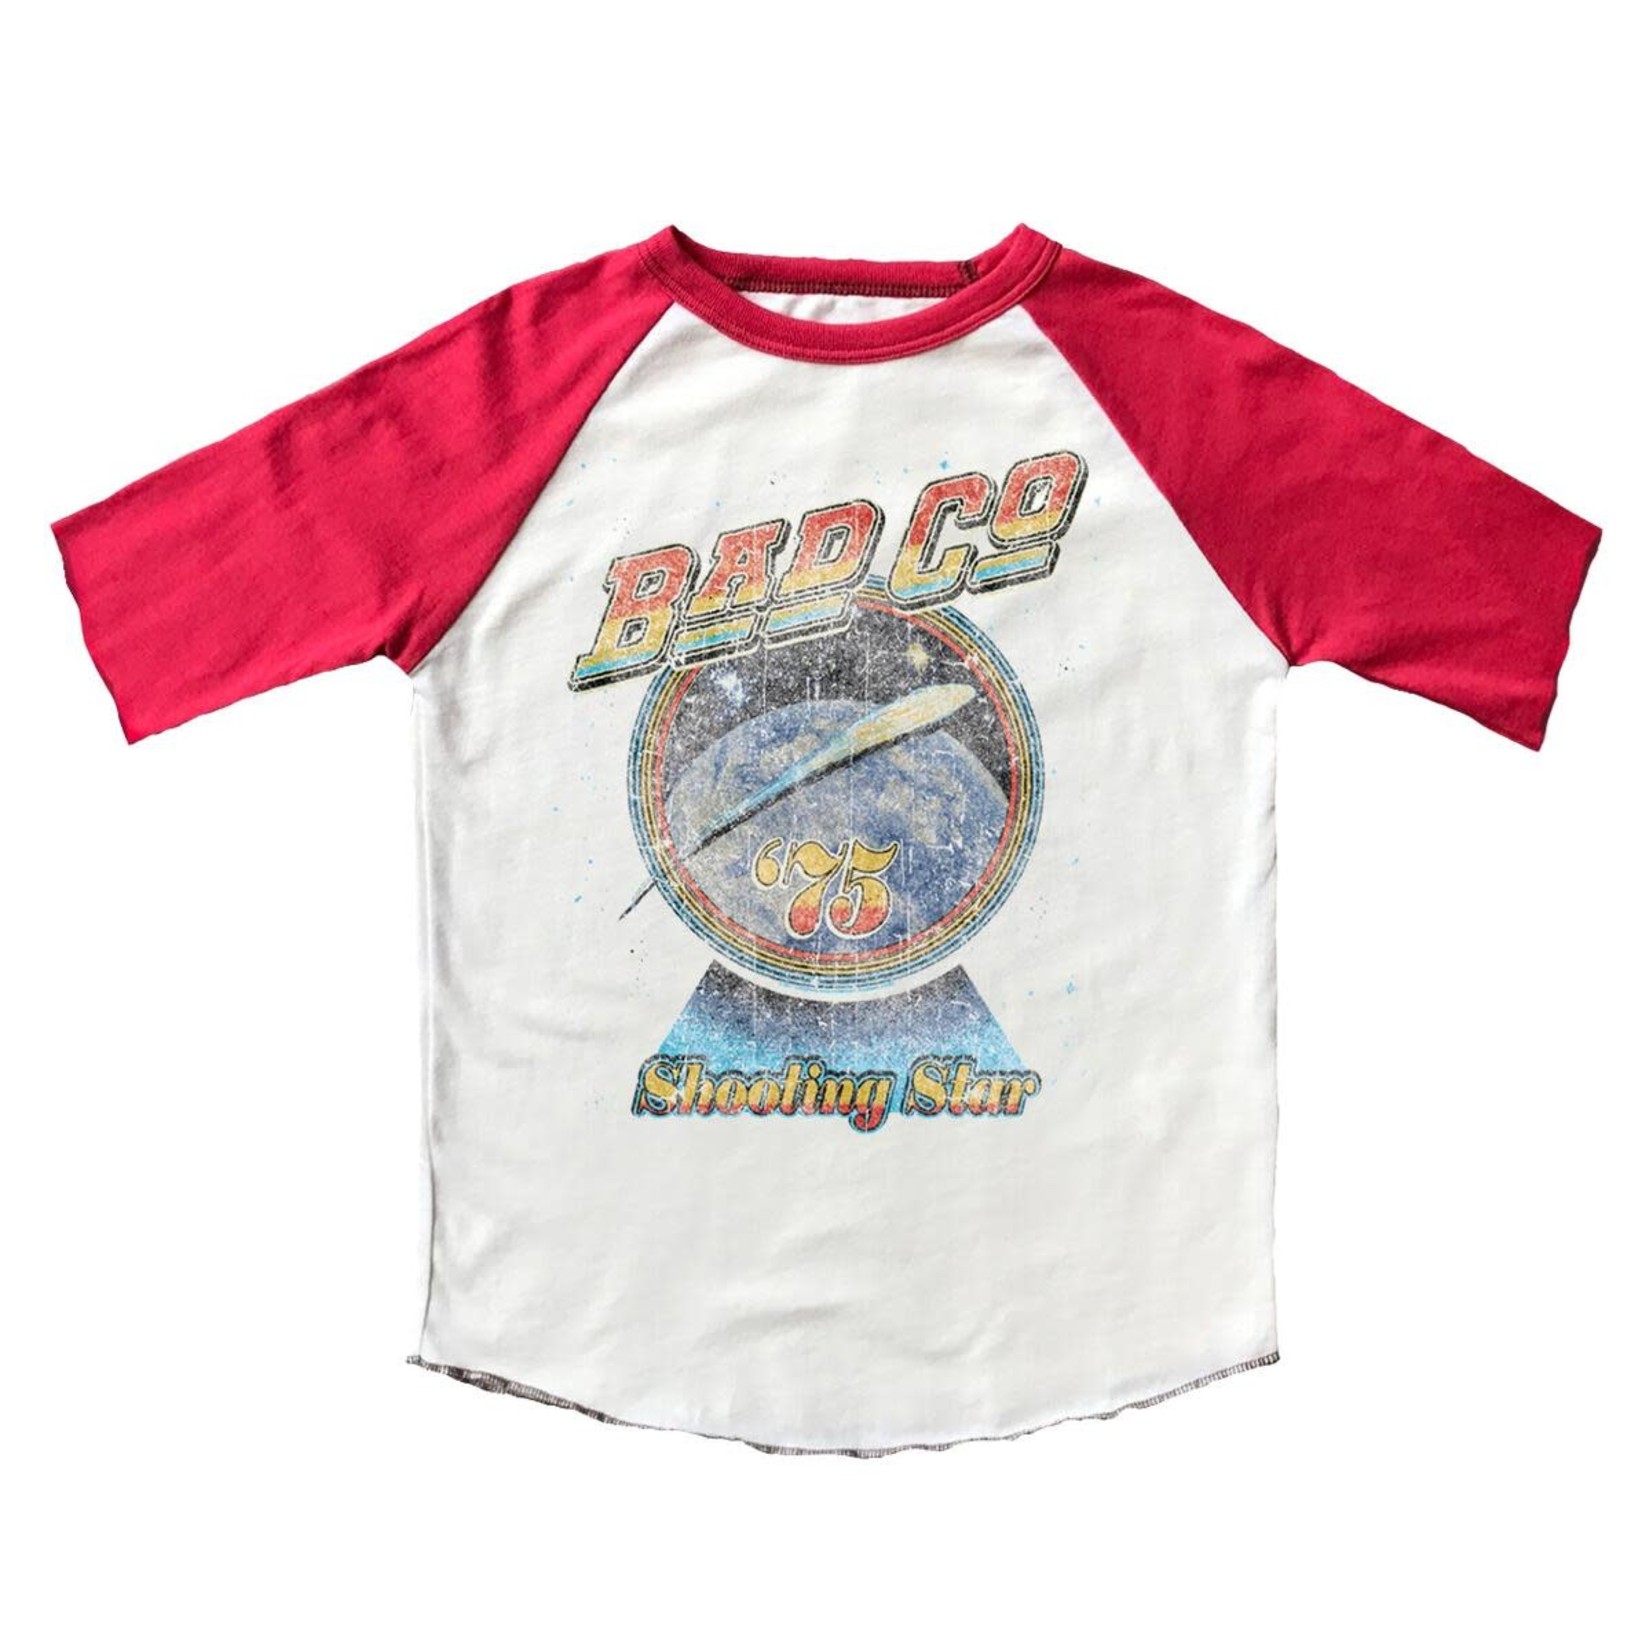 Rowdy Spout Rowdy Sprout Cream/Red Bad Company S/S Raglan Tee